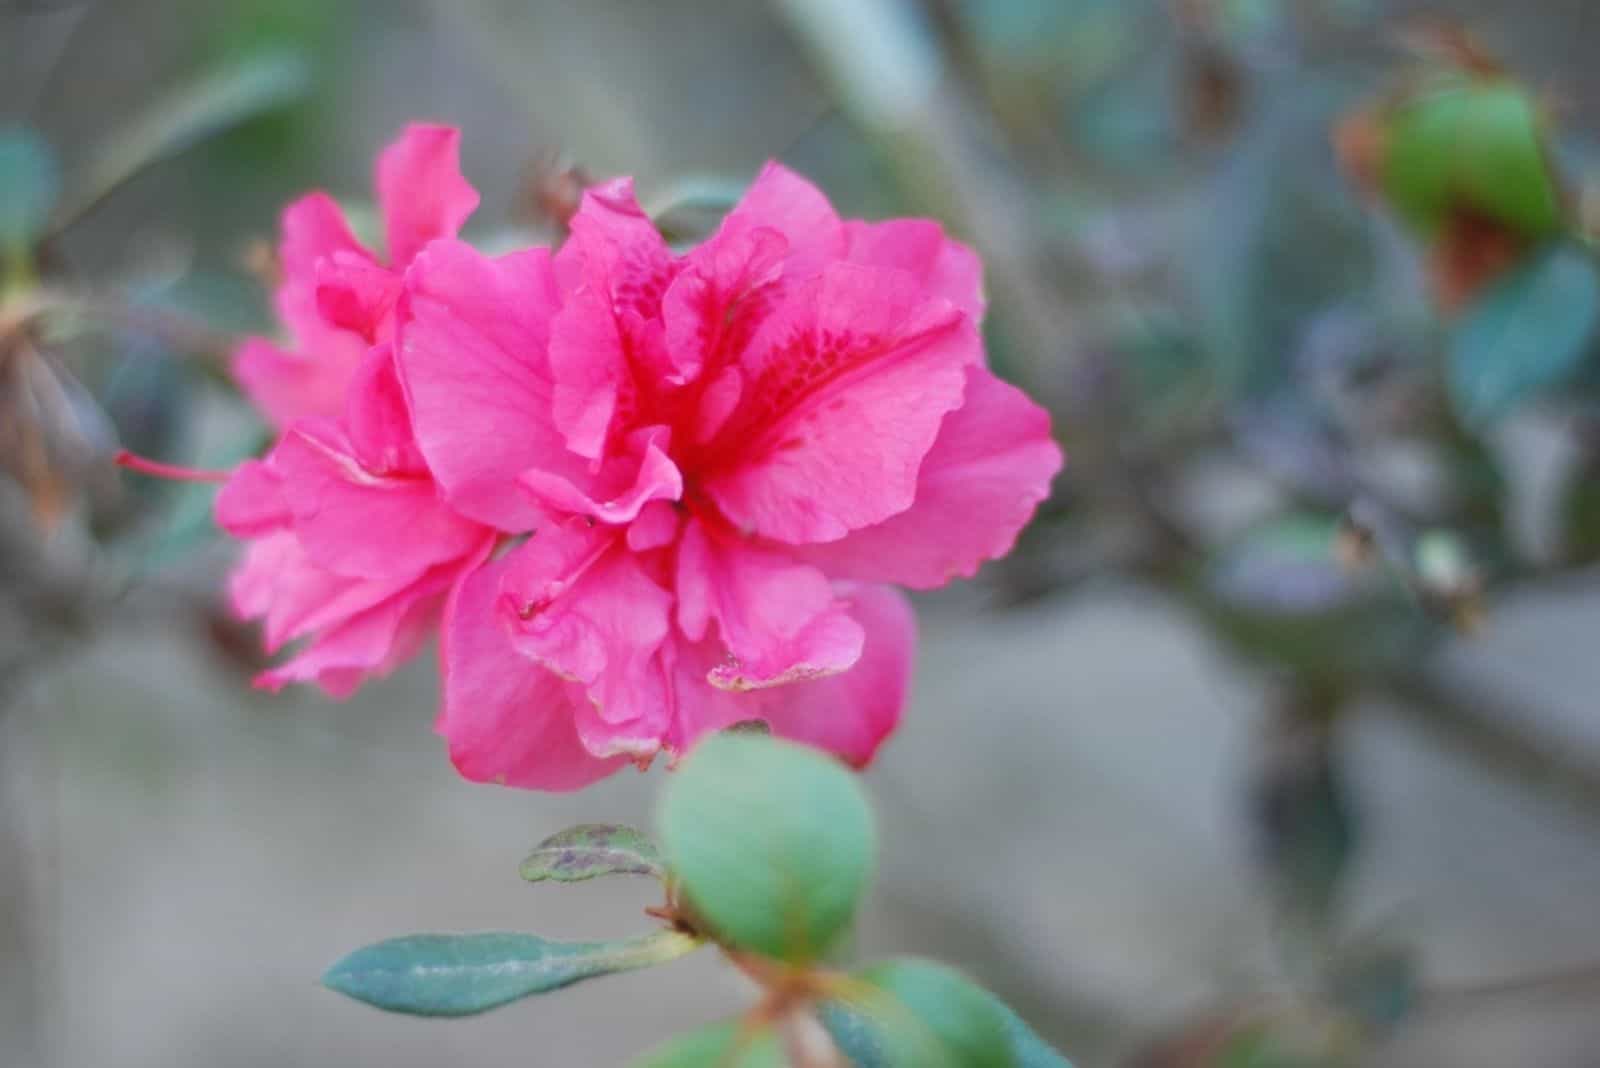 Fertilize Your Azaleas This Way To Get More Colorful Blossoms